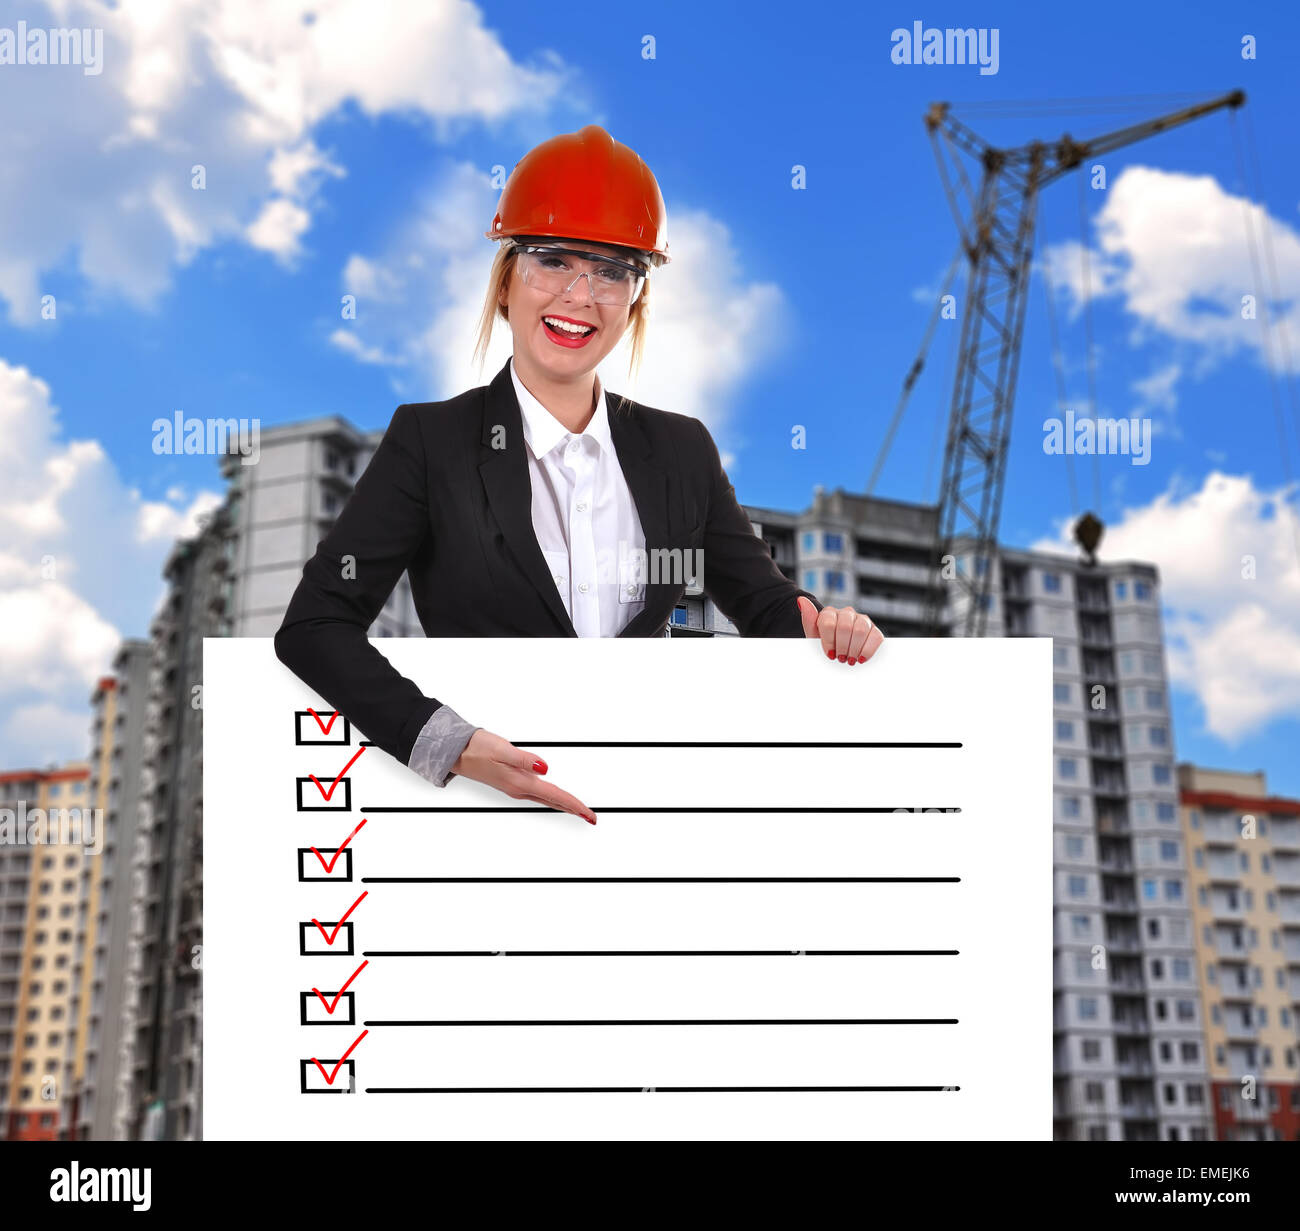 Engineer woman holding placard with application form Stock Photo